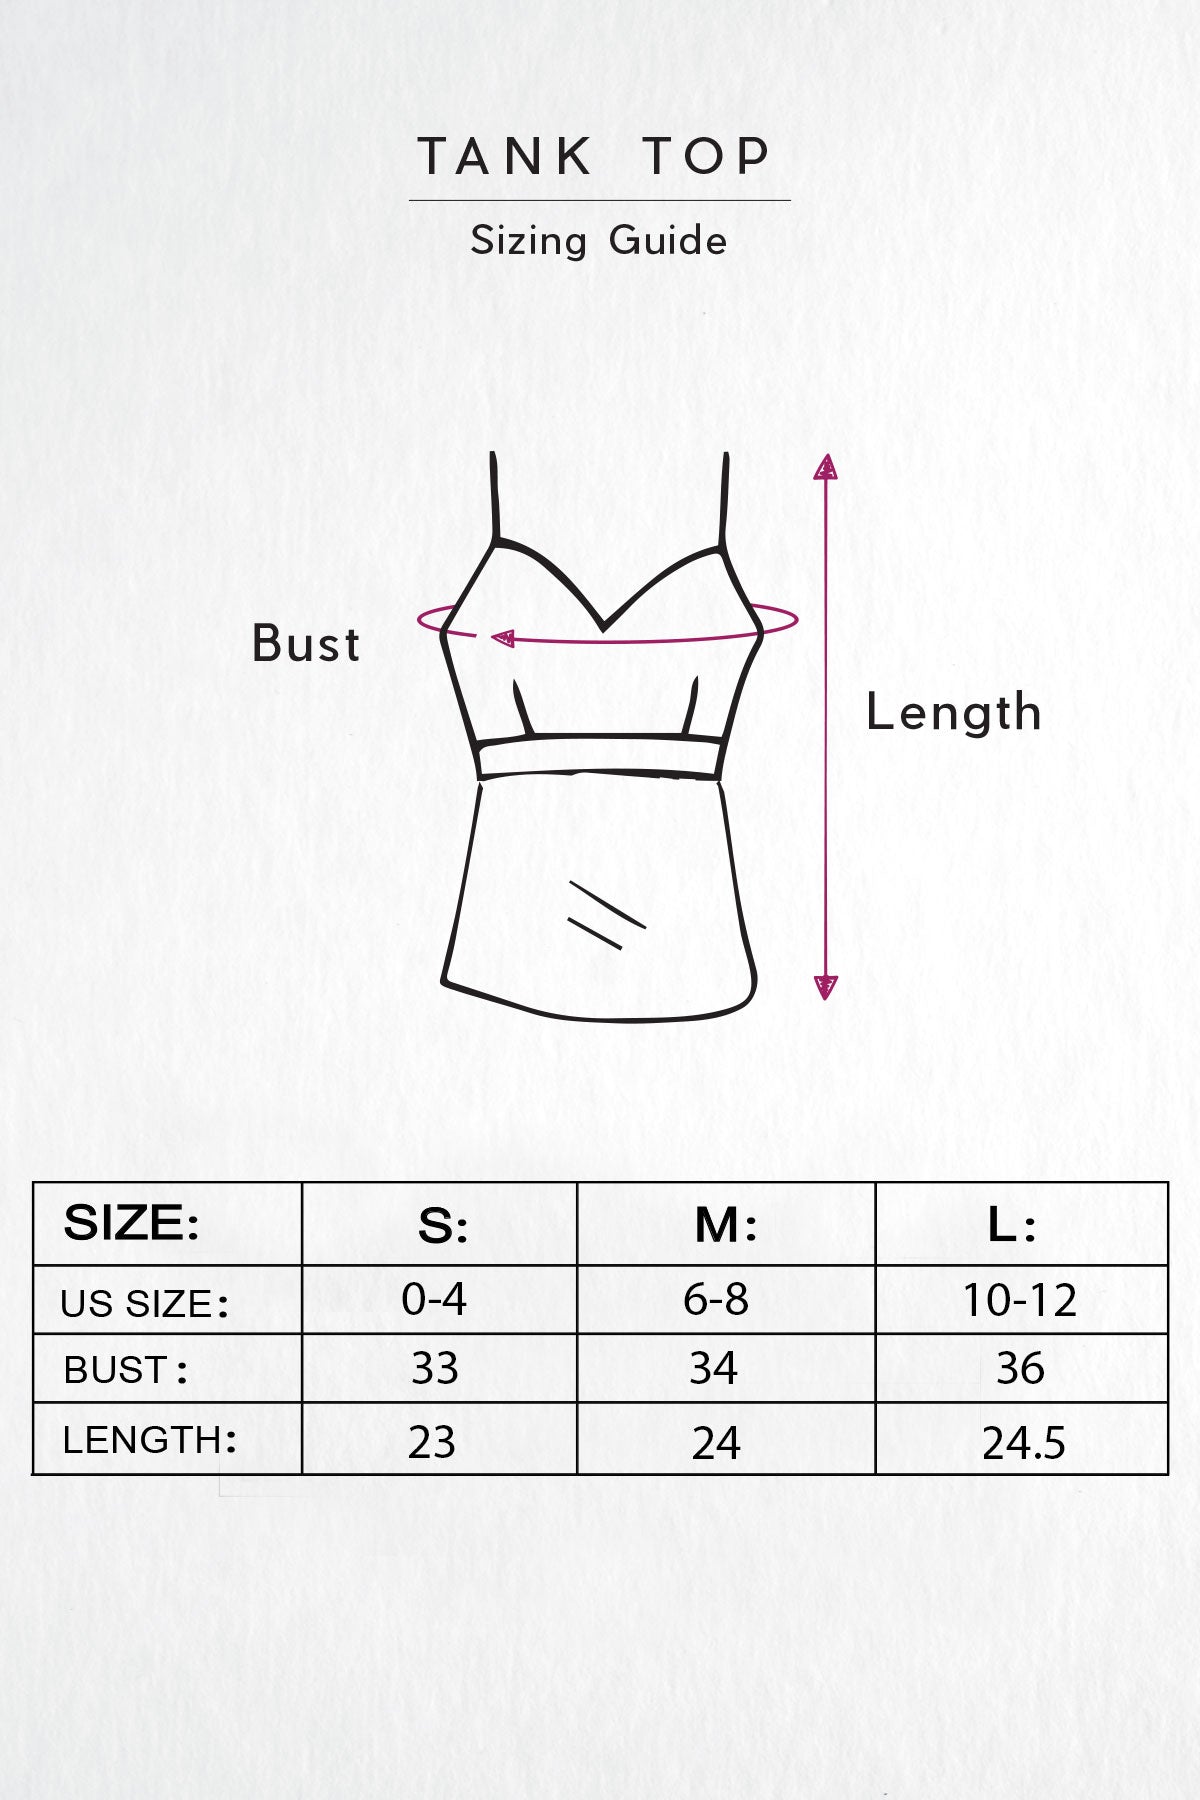 Tank Top Sizing Guide